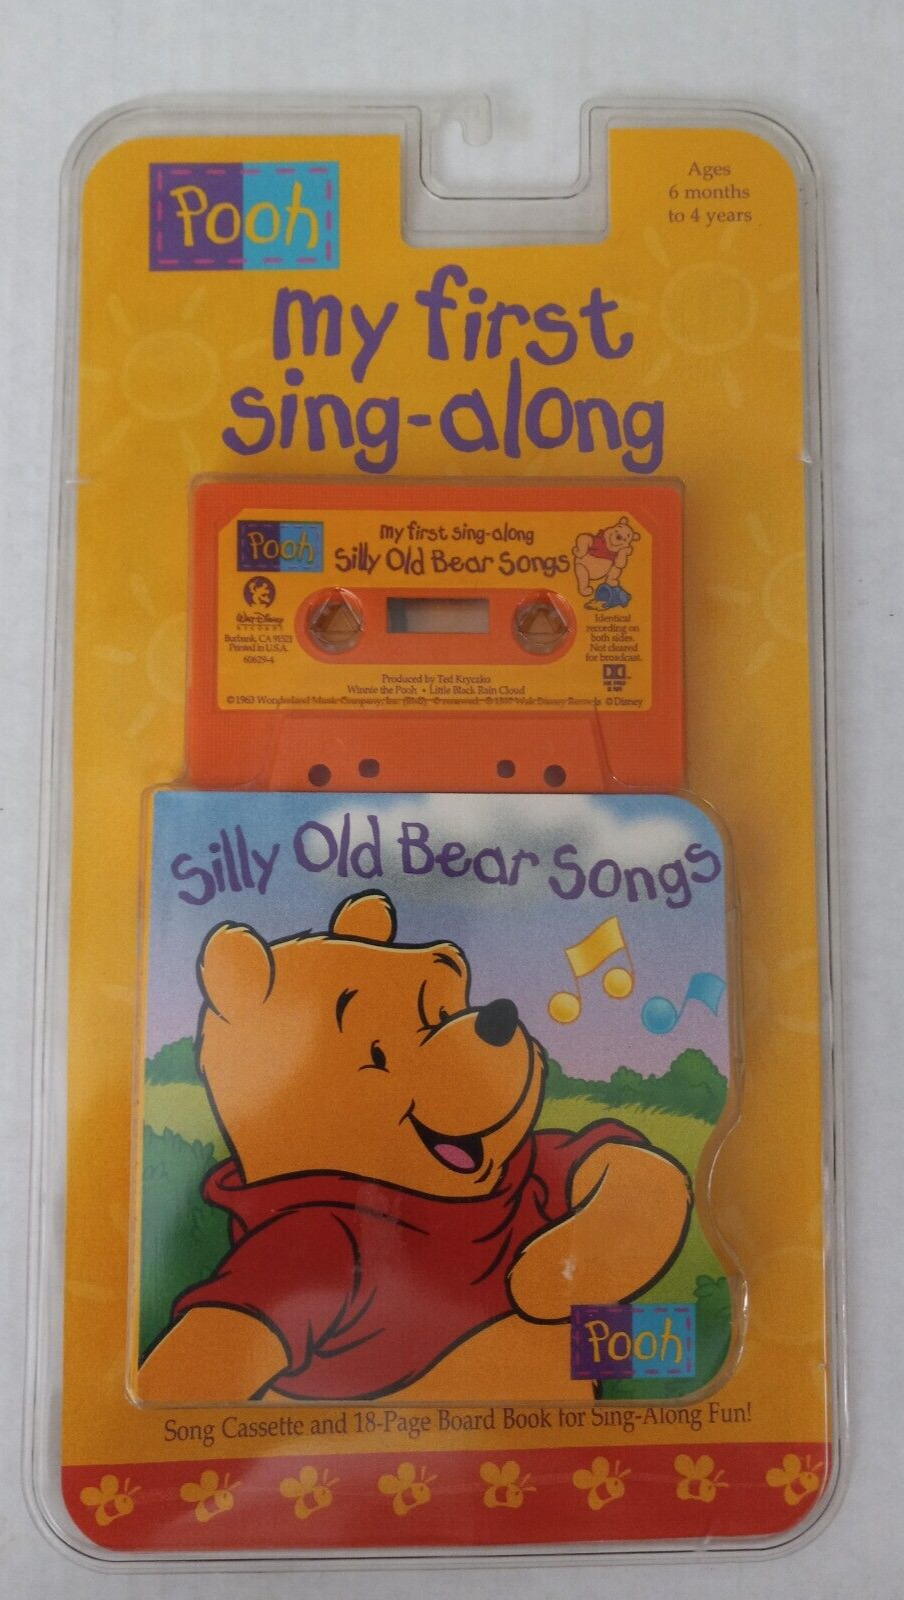 Vintage 1997 Pooh My First Sing-Along Book and Cassette Silly Old Bear Songs NEW